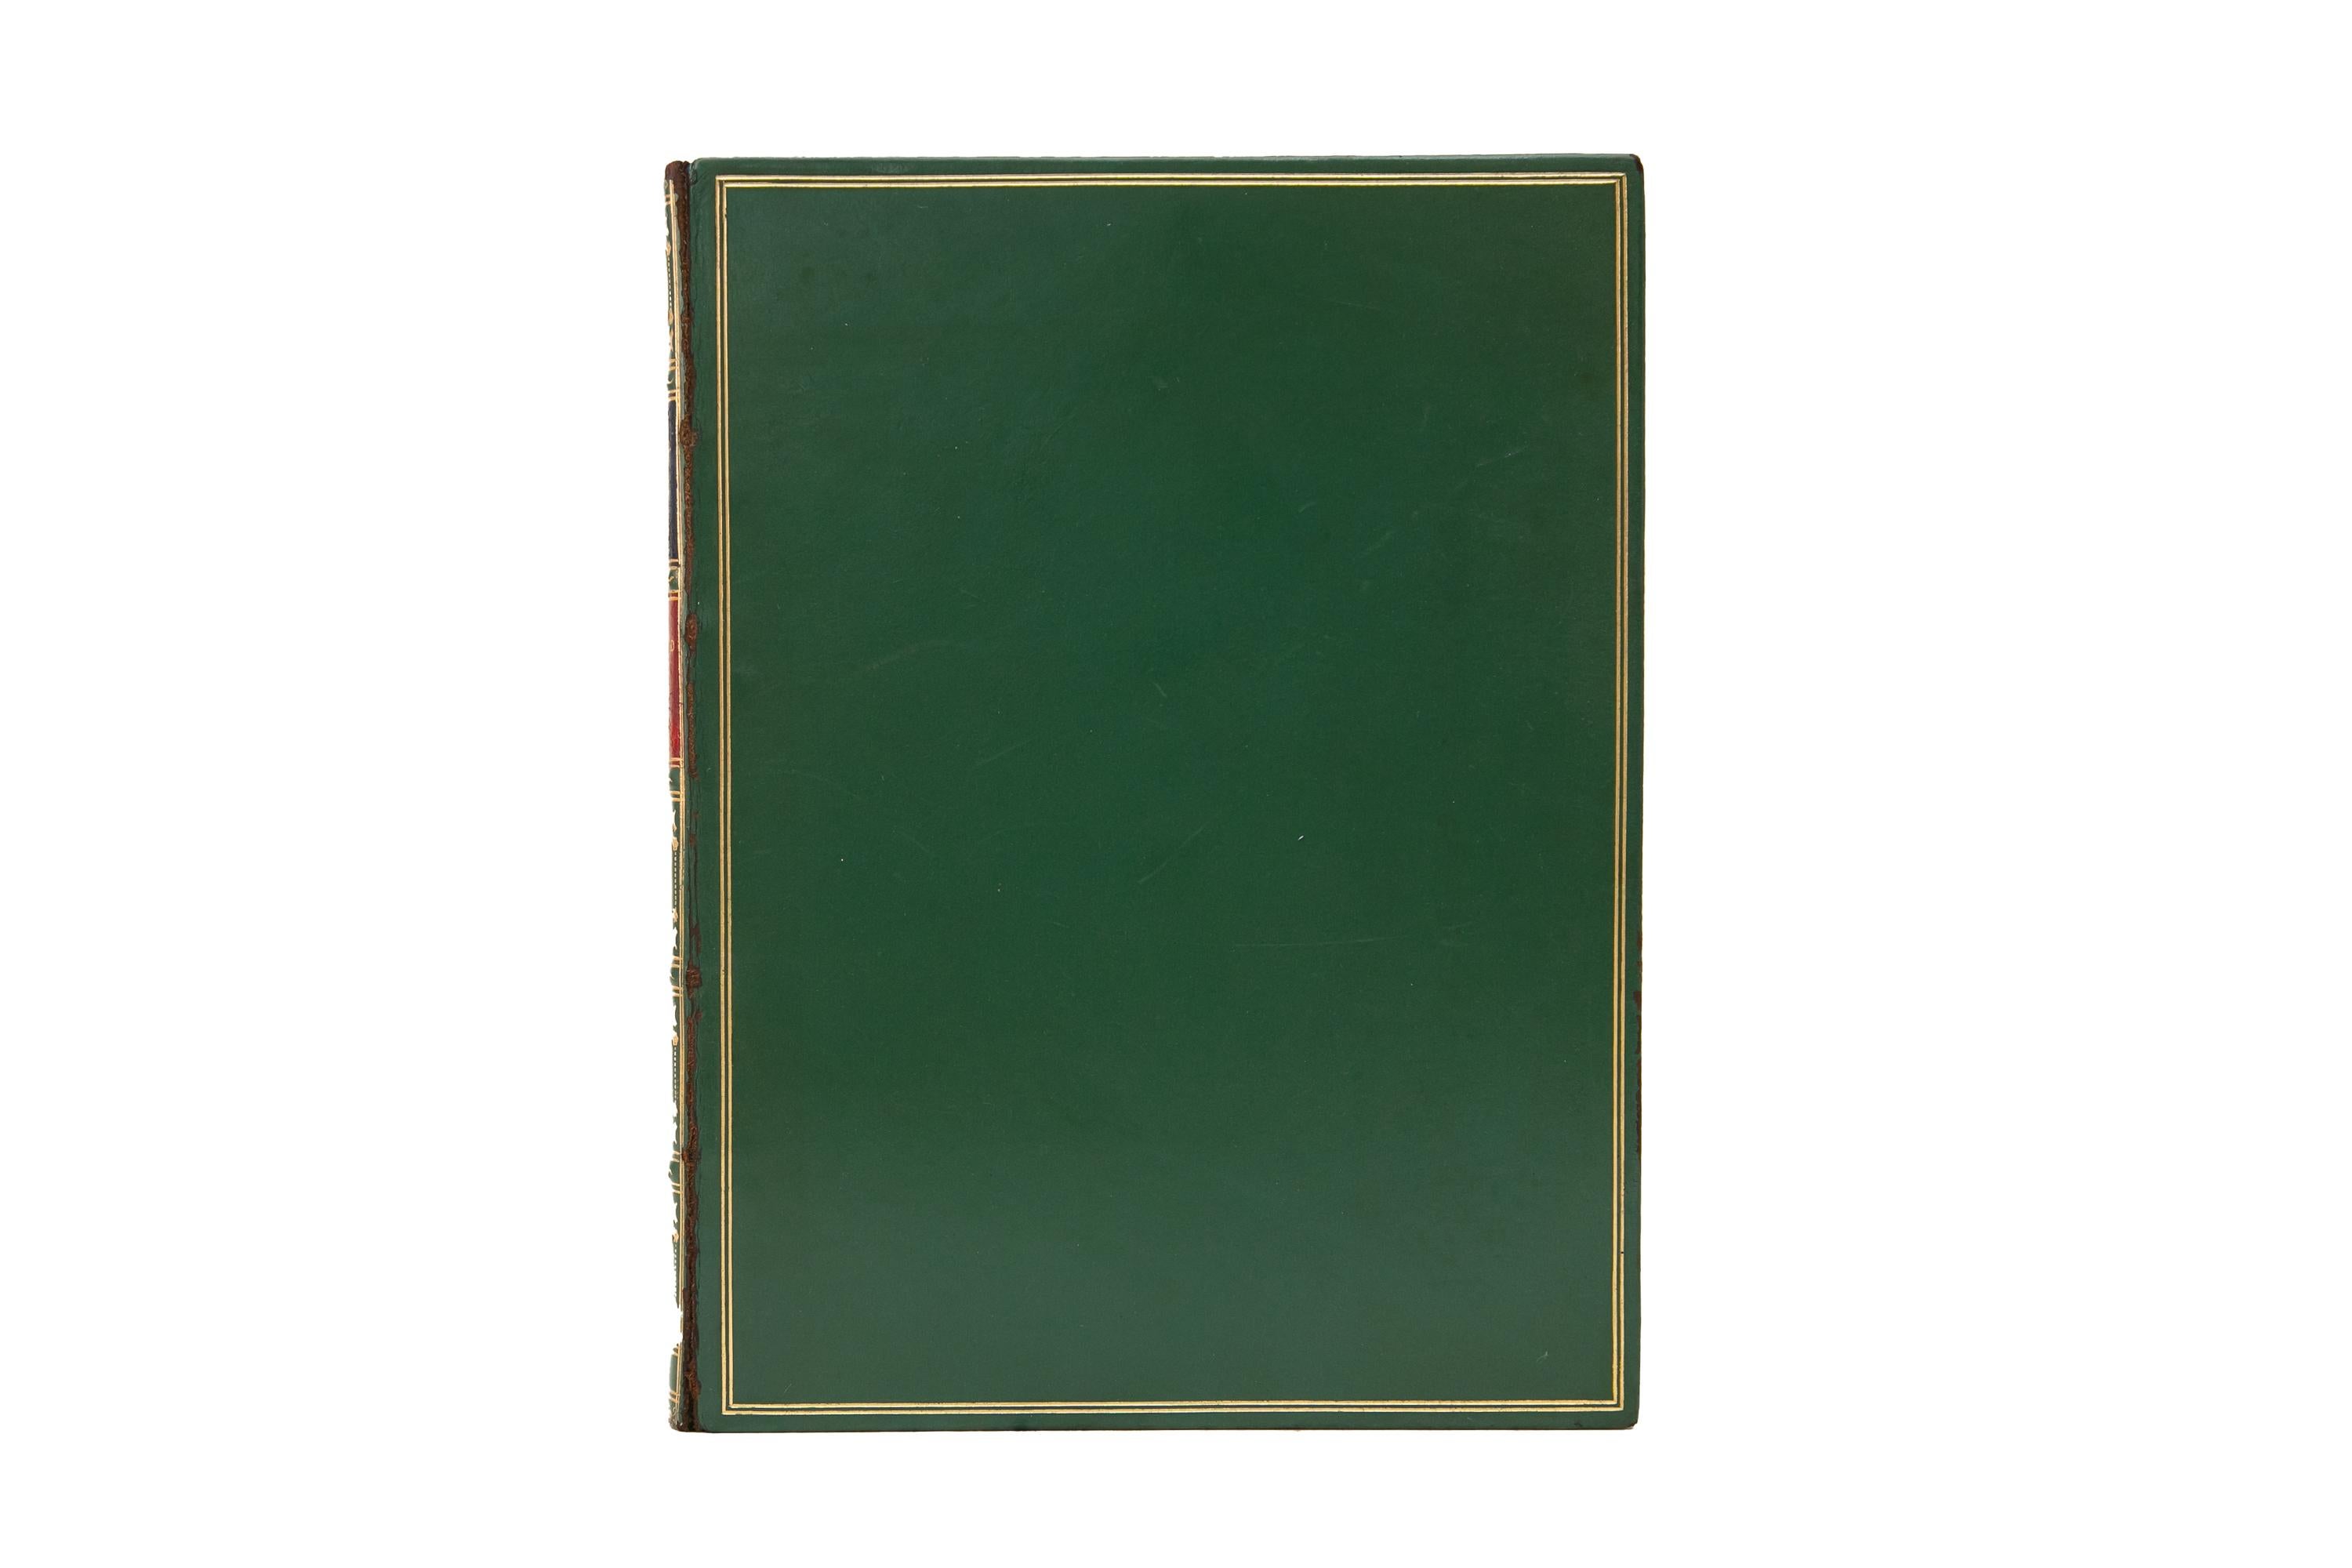 1 Volume. Izaak Walton, The Compleat Angler. First Rackham Trade Edition. Bound by Bayntun in full green calf; covers bordered in gilt-tooling. Raised band spine with gilt-tooled details and red and blue morocco labels. All edges gilt with